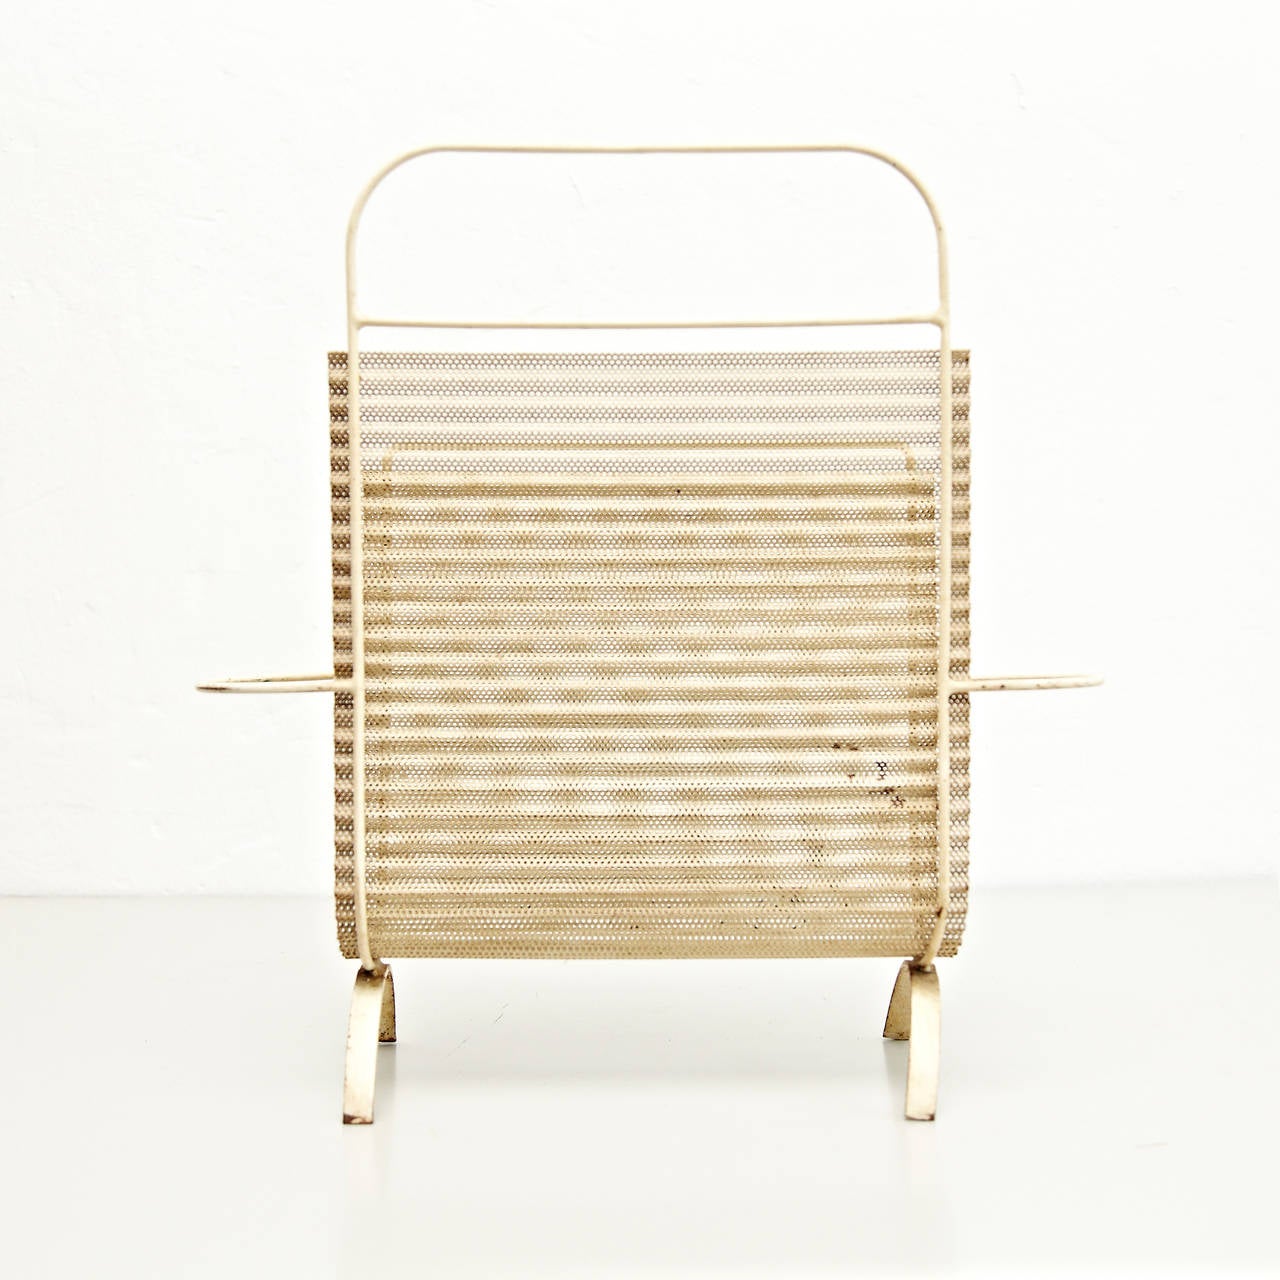 Magazine holder, model Harpers, designed by Mathieu Matégot.
Manufactured by ateliers Matégot (France), circa 1950.
Folded, perforated metal.

In good original condition, with minor wear consistent with age and use, preserving a beautiful